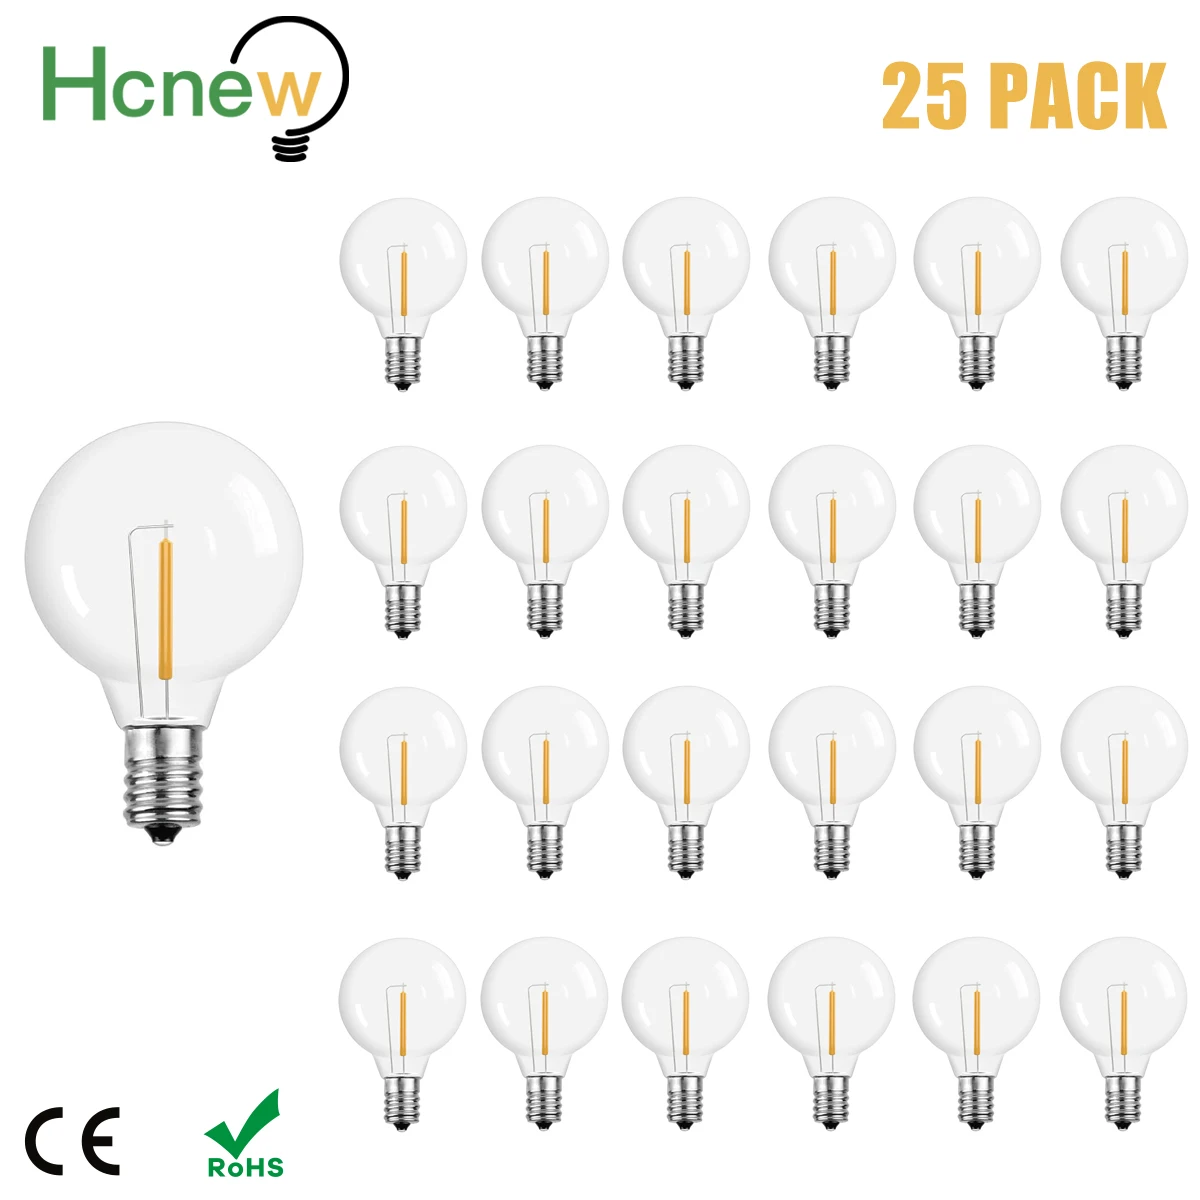 25PCS G40 1W LED String Lights Replacement Bulb E12 110V 220V Warm White 2200K LED Lamps Replace G40  7W Incandescent Bulbs